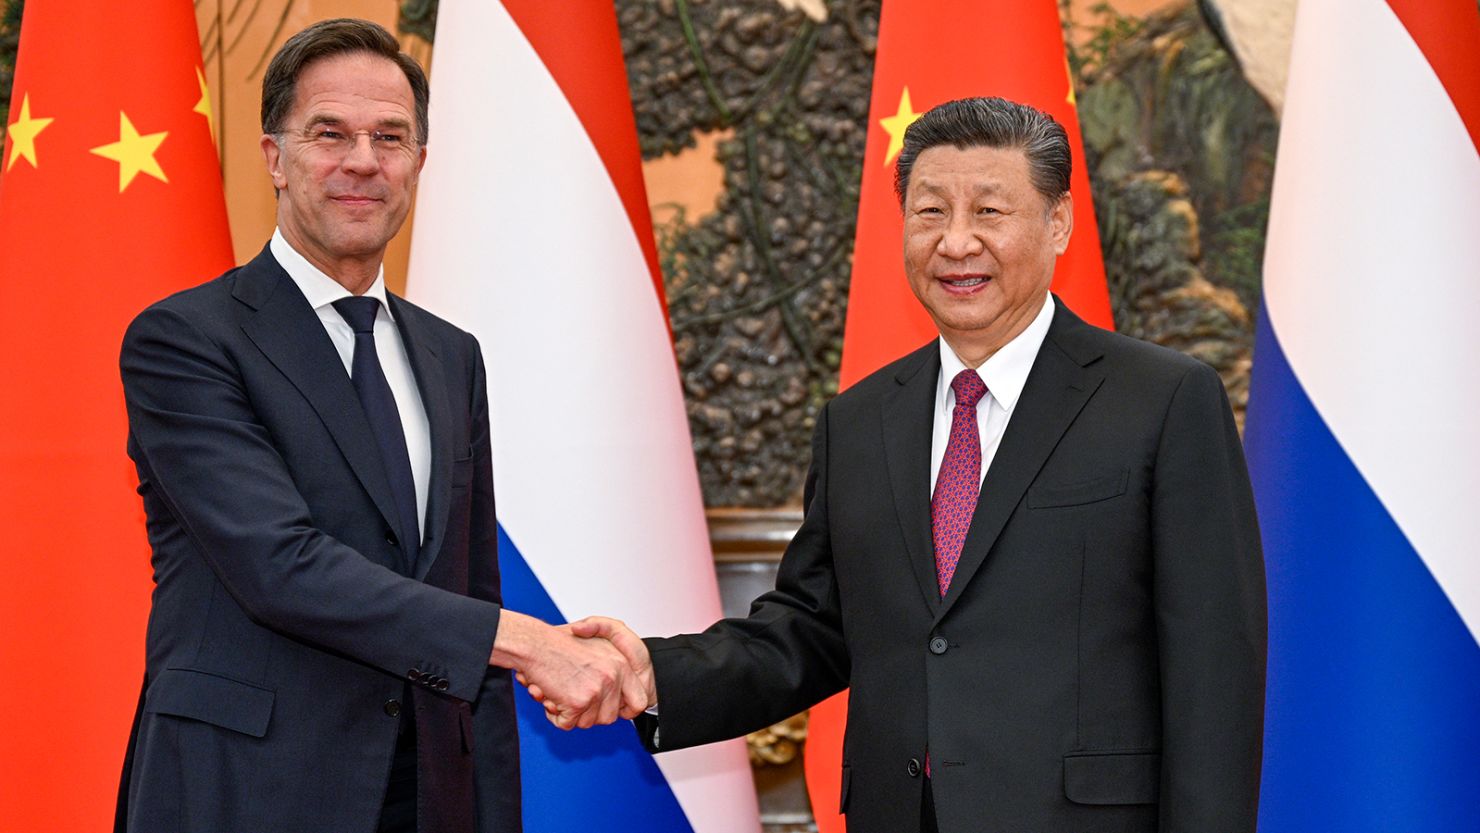 In this photo released by Xinhua News Agency, Chinese President Xi Jinping, right, shakes hands with Dutch Prime Minister Mark Rutte at the Great Hall of the People in Beijing.